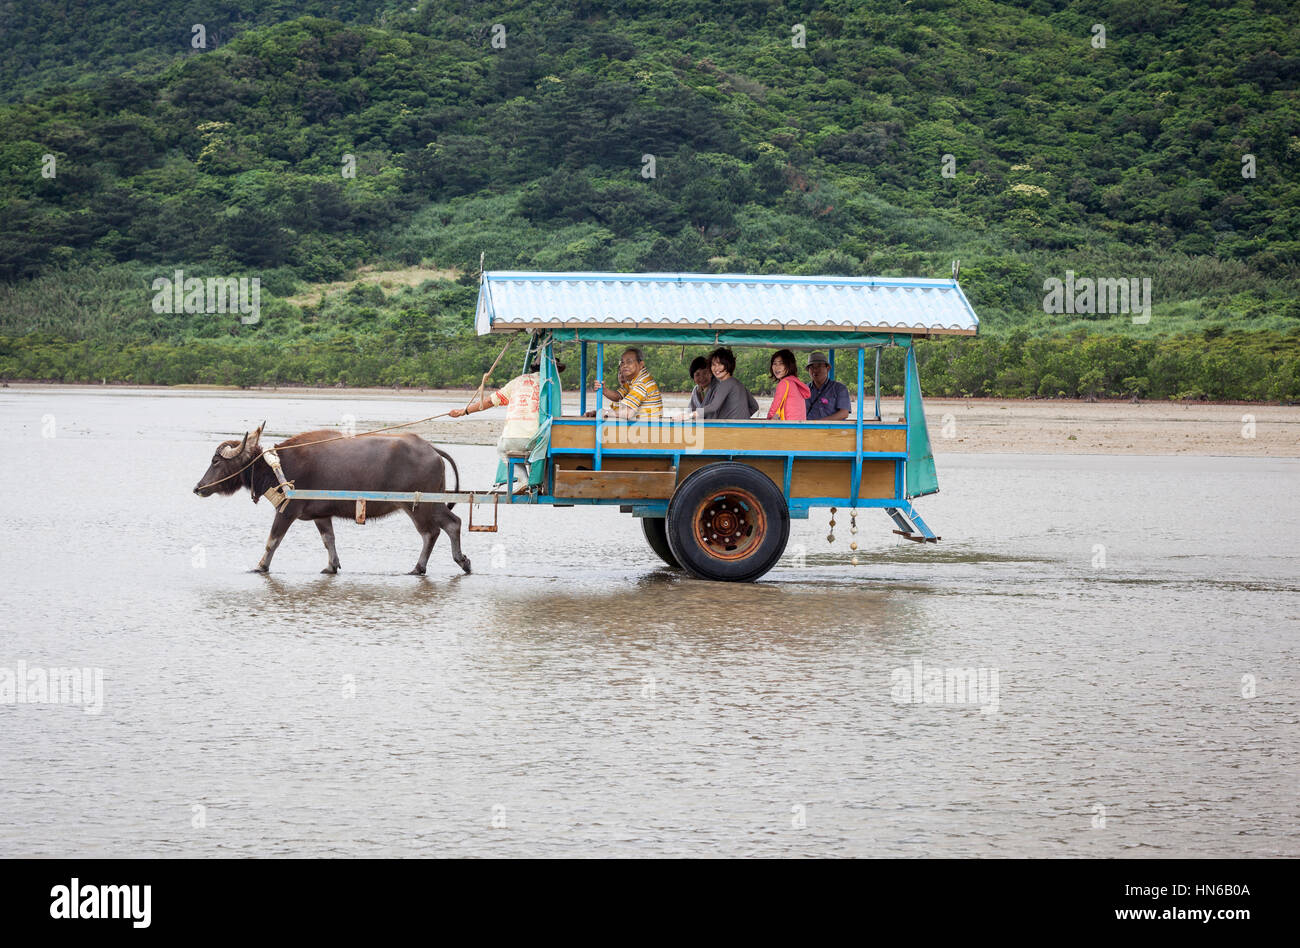 Iriomote, Japan - April 16, 2012: People travelling on a cart pulled by water buffalo. This is a popular way to cross the shallow water channel from I Stock Photo